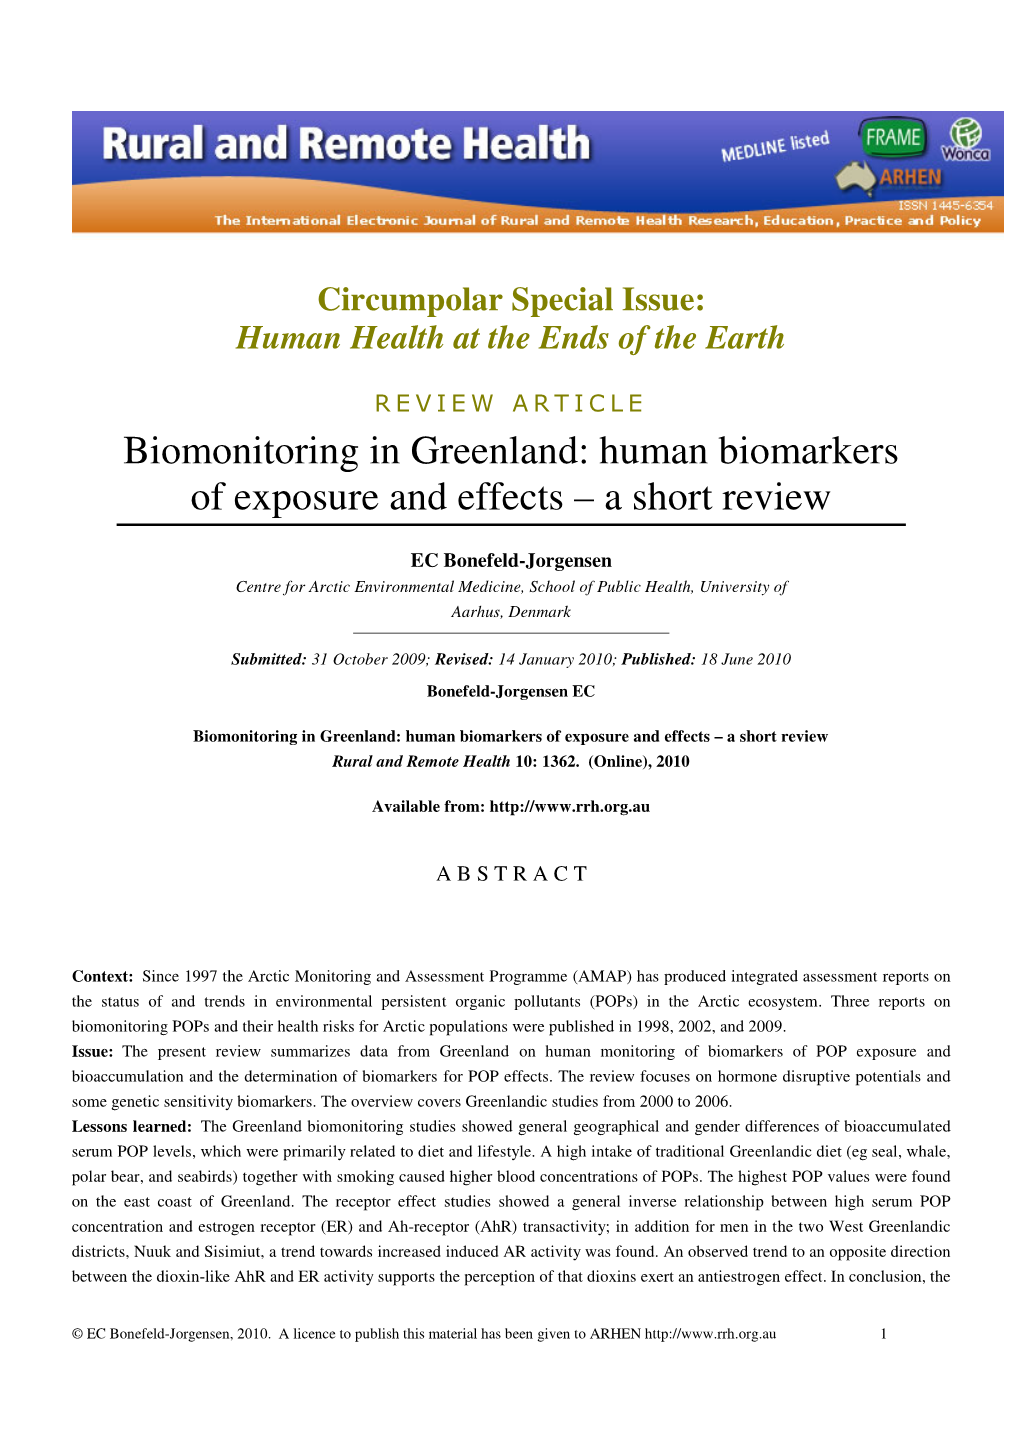 Biomonitoring in Greenland: Human Biomarkers of Exposure and Effects – a Short Review